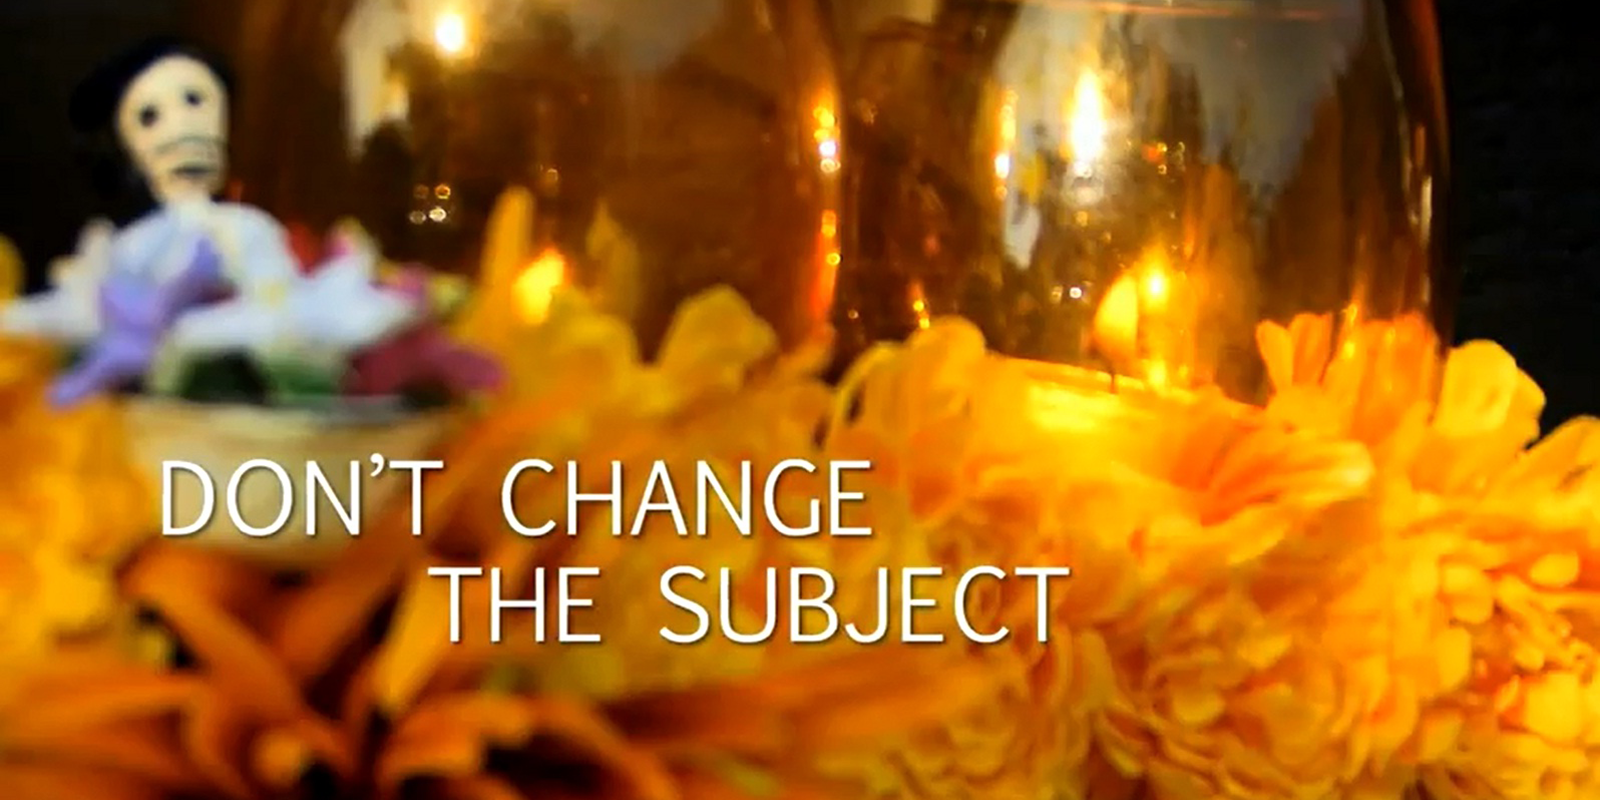 A viewing & discussion of 'Dont change the subject'